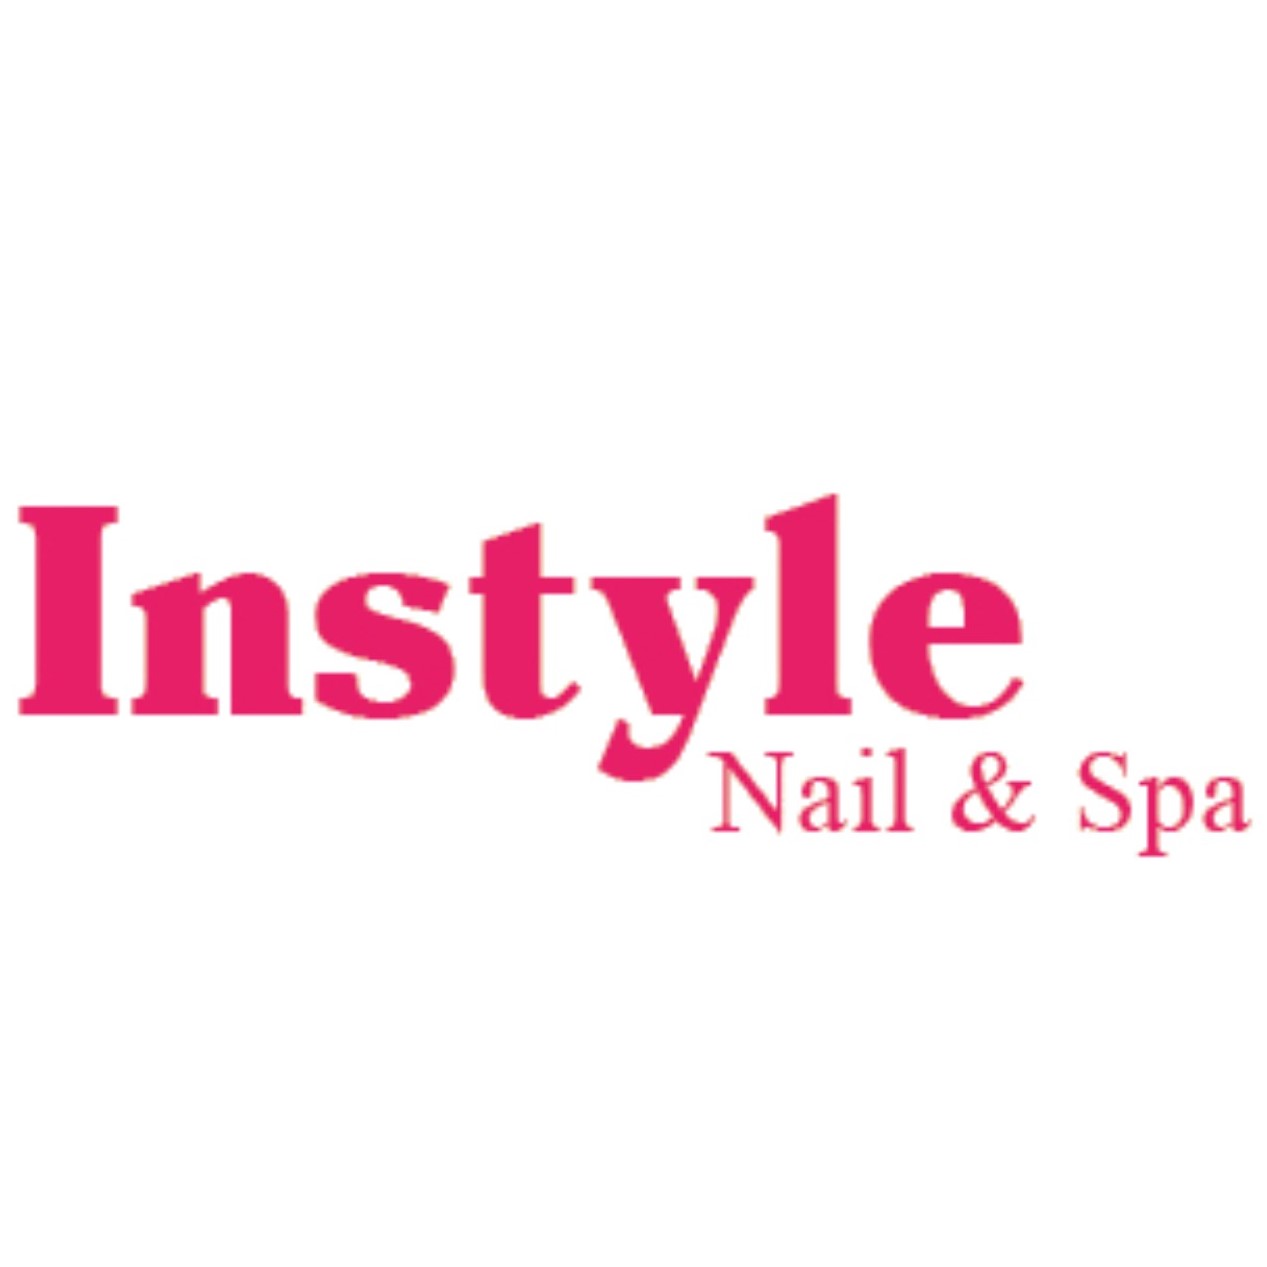 In Style Nails